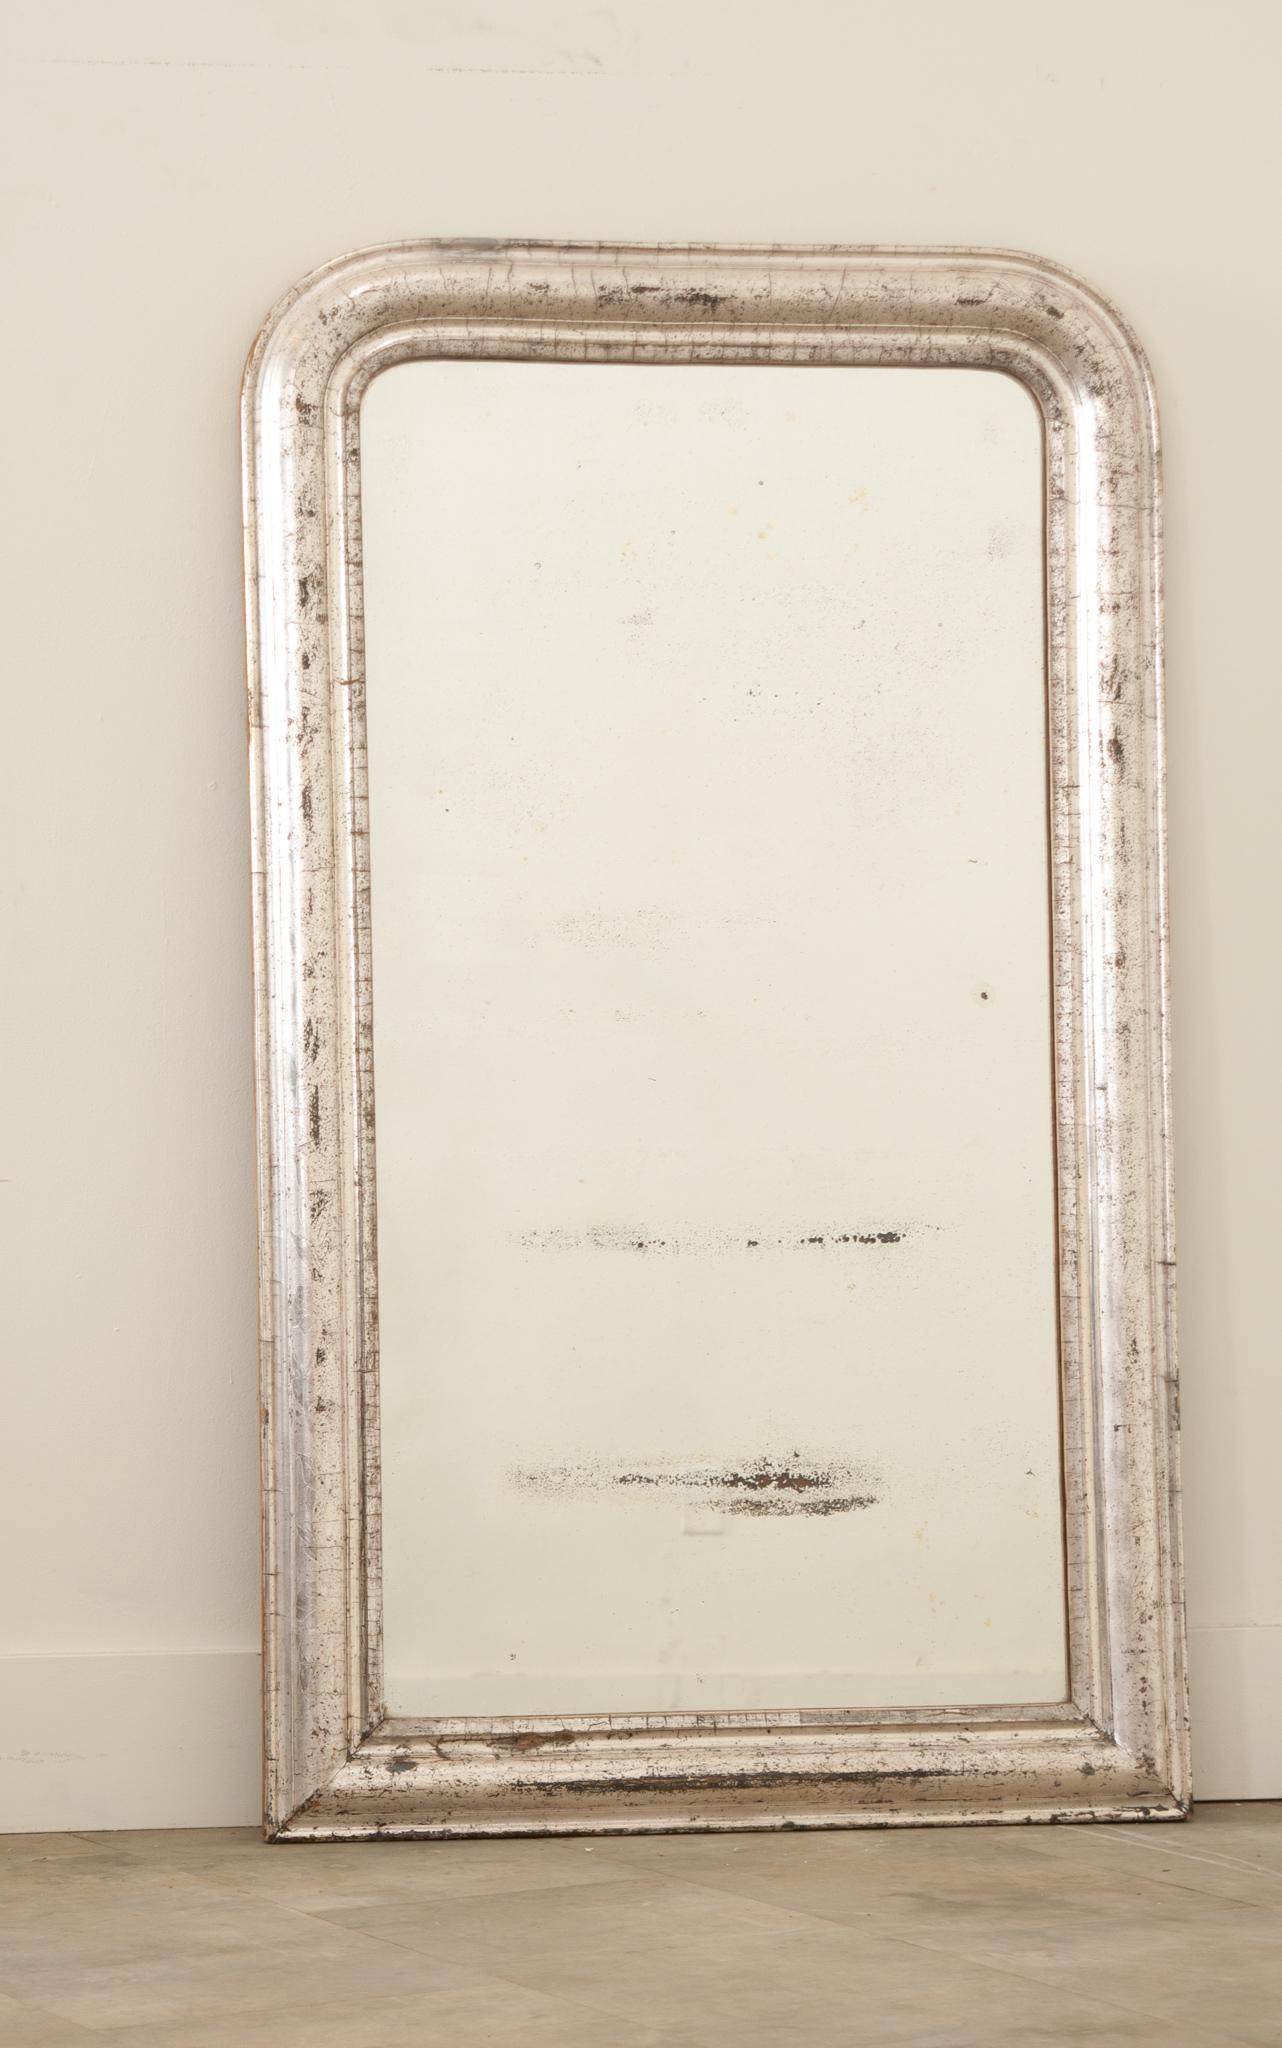 Hand-crafted in France in the 19th Century, this Louis Philippe antique mirror has traditional, timeless lines with rounded corners. The frame is decorated with a luxurious silver leaf finish over a beautiful well patinated gilt frame that is